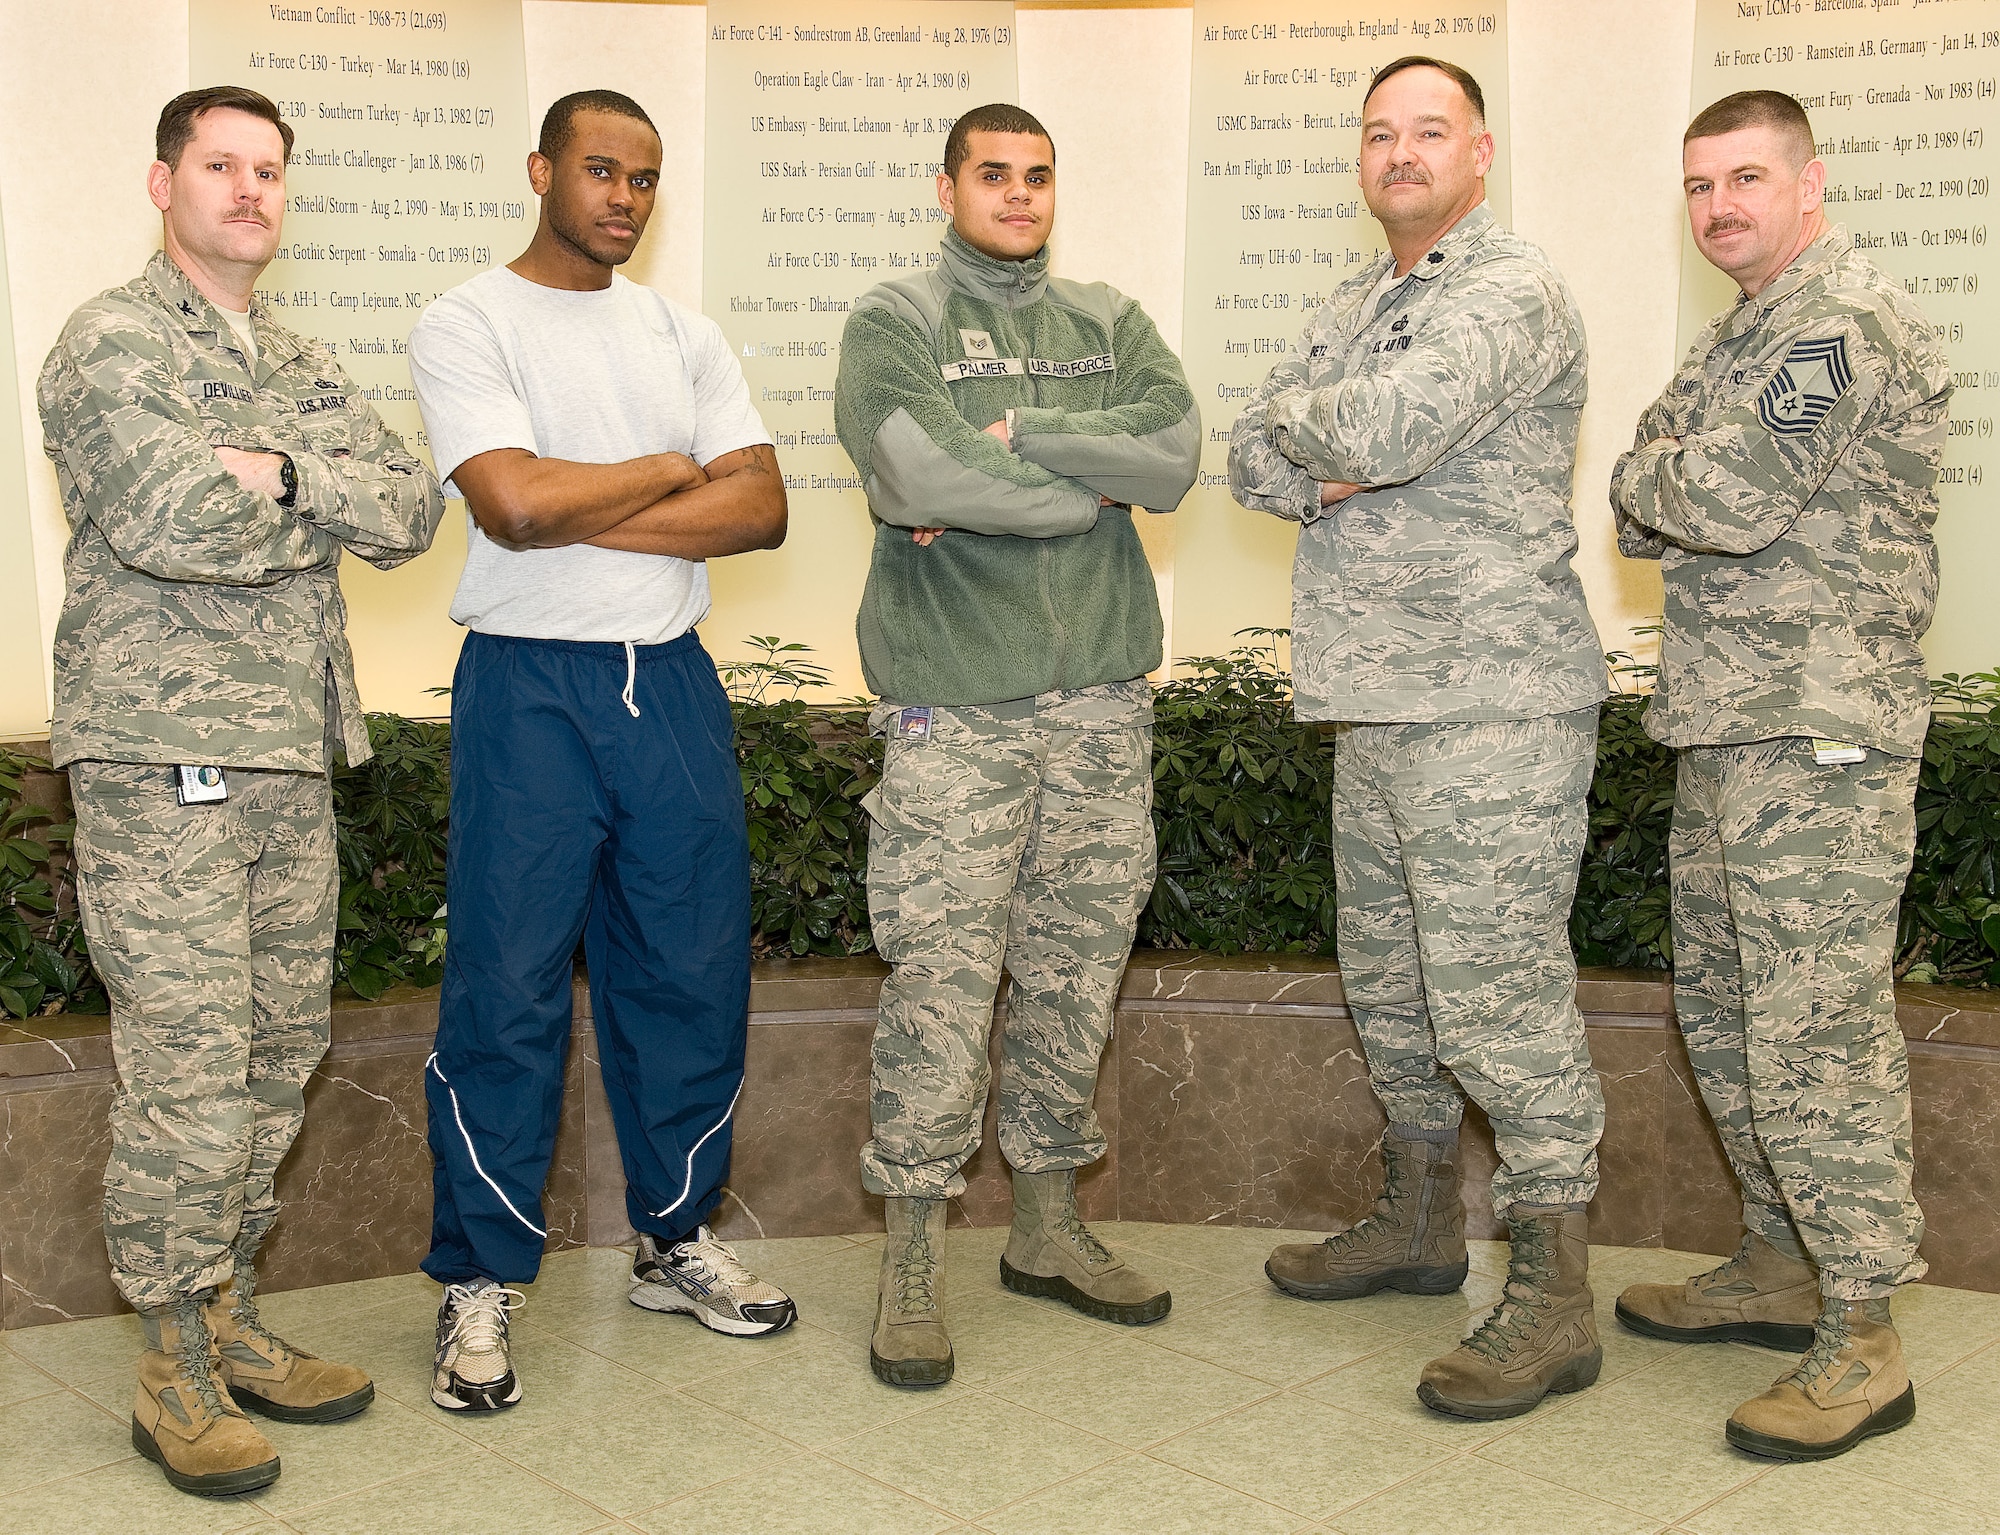 Col. John Devillier, Air Force Mortuary Affairs Operations commander, Senior Airman Marvin Young, departures specialist, Staff Sgt. Justin Palmer, Client Systems technician, Lt. Col. David Kretz, AFMAO deputy commander, and Chief Master Sgt. Sean Applegate, AFMAO chief enlisted manager, sport mustaches they grew for Mustache March as they pose in the atrium of the Charles C. Carson Center for Mortuary Affairs, Dover Air Force Base, Del., March 25, 2014. The mustaches were part of a challenge from Chief of Staff of the Air Force Gen. Mark Welsh, who issued the challenge to the entire Air Force. (U.S.  Air Force photo/Roland Balik)